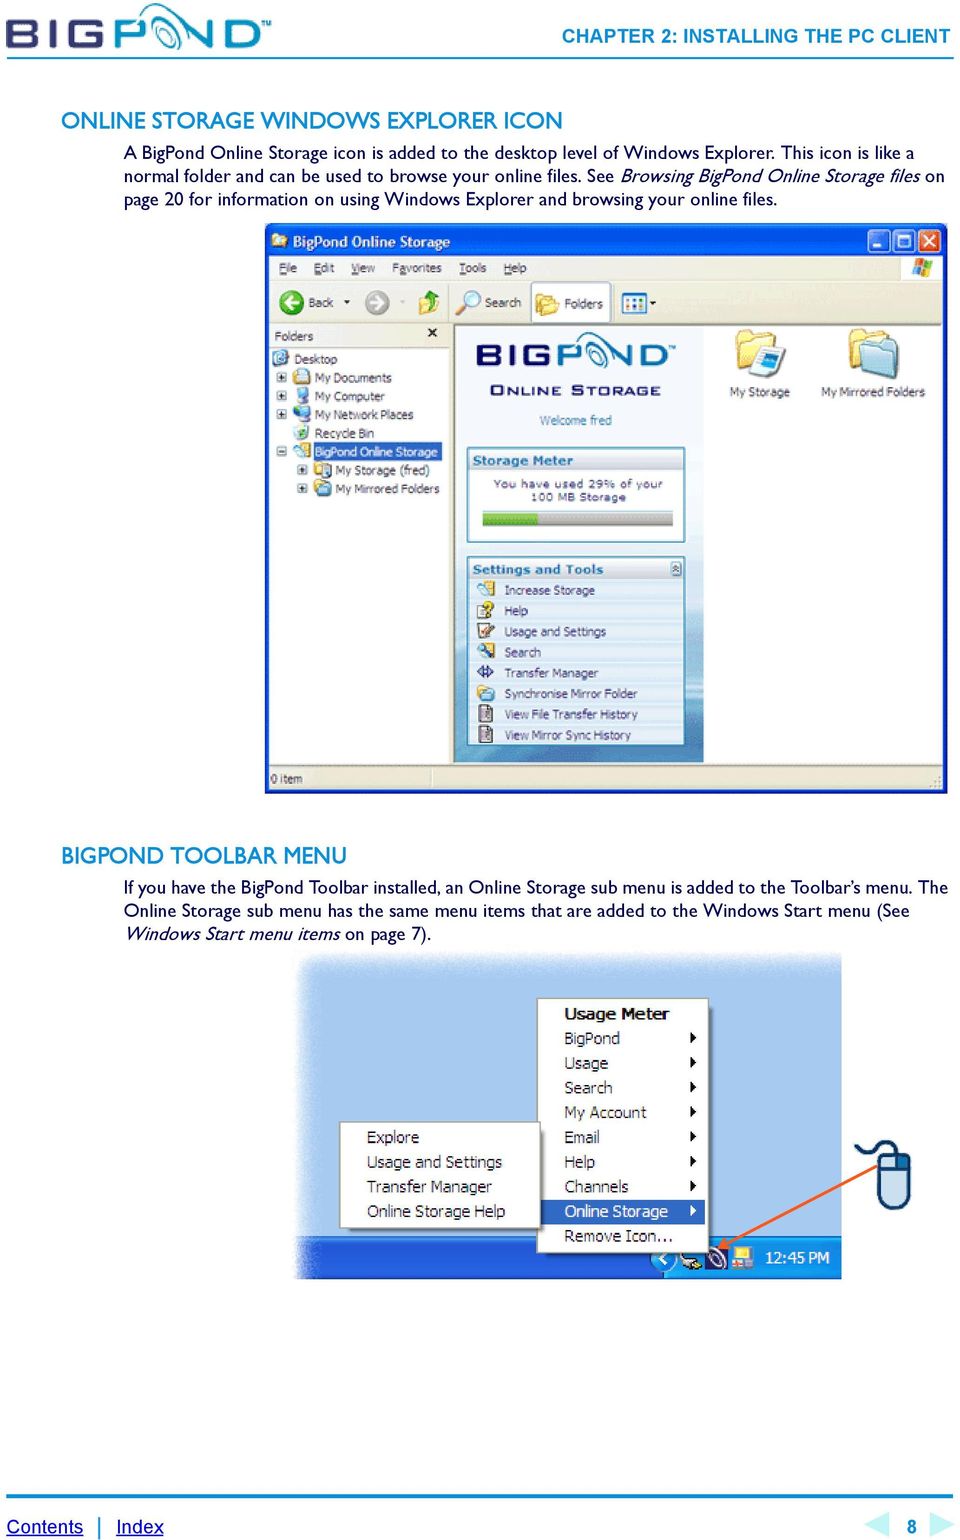 See Browsing BigPond Online Storage files on page 20 for information on using Windows Explorer and browsing your online files.